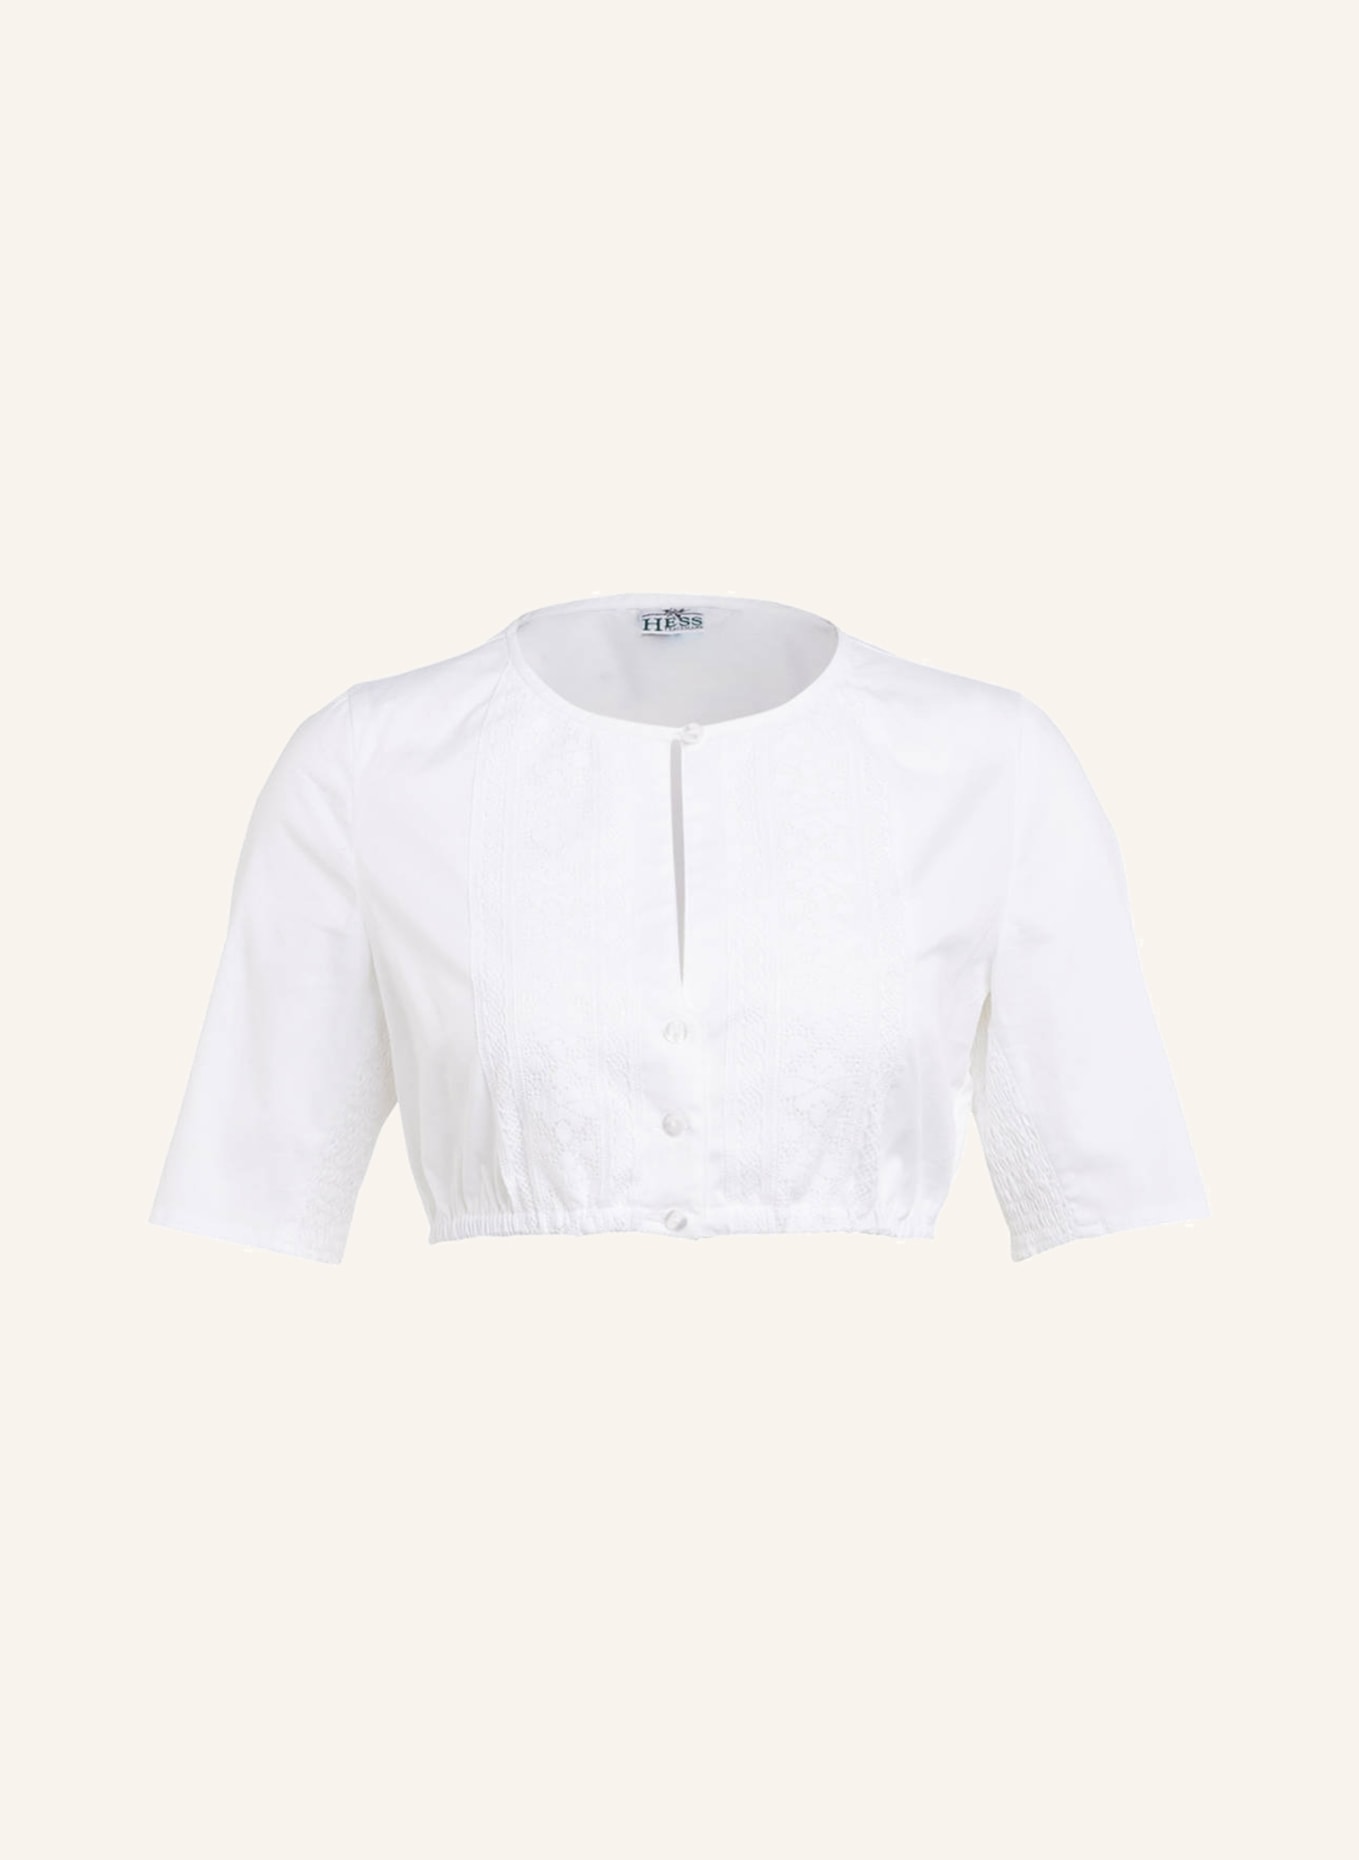 BERWIN & WOLFF Dirndl blouse with lace trim , Color: WHITE (Image 1)